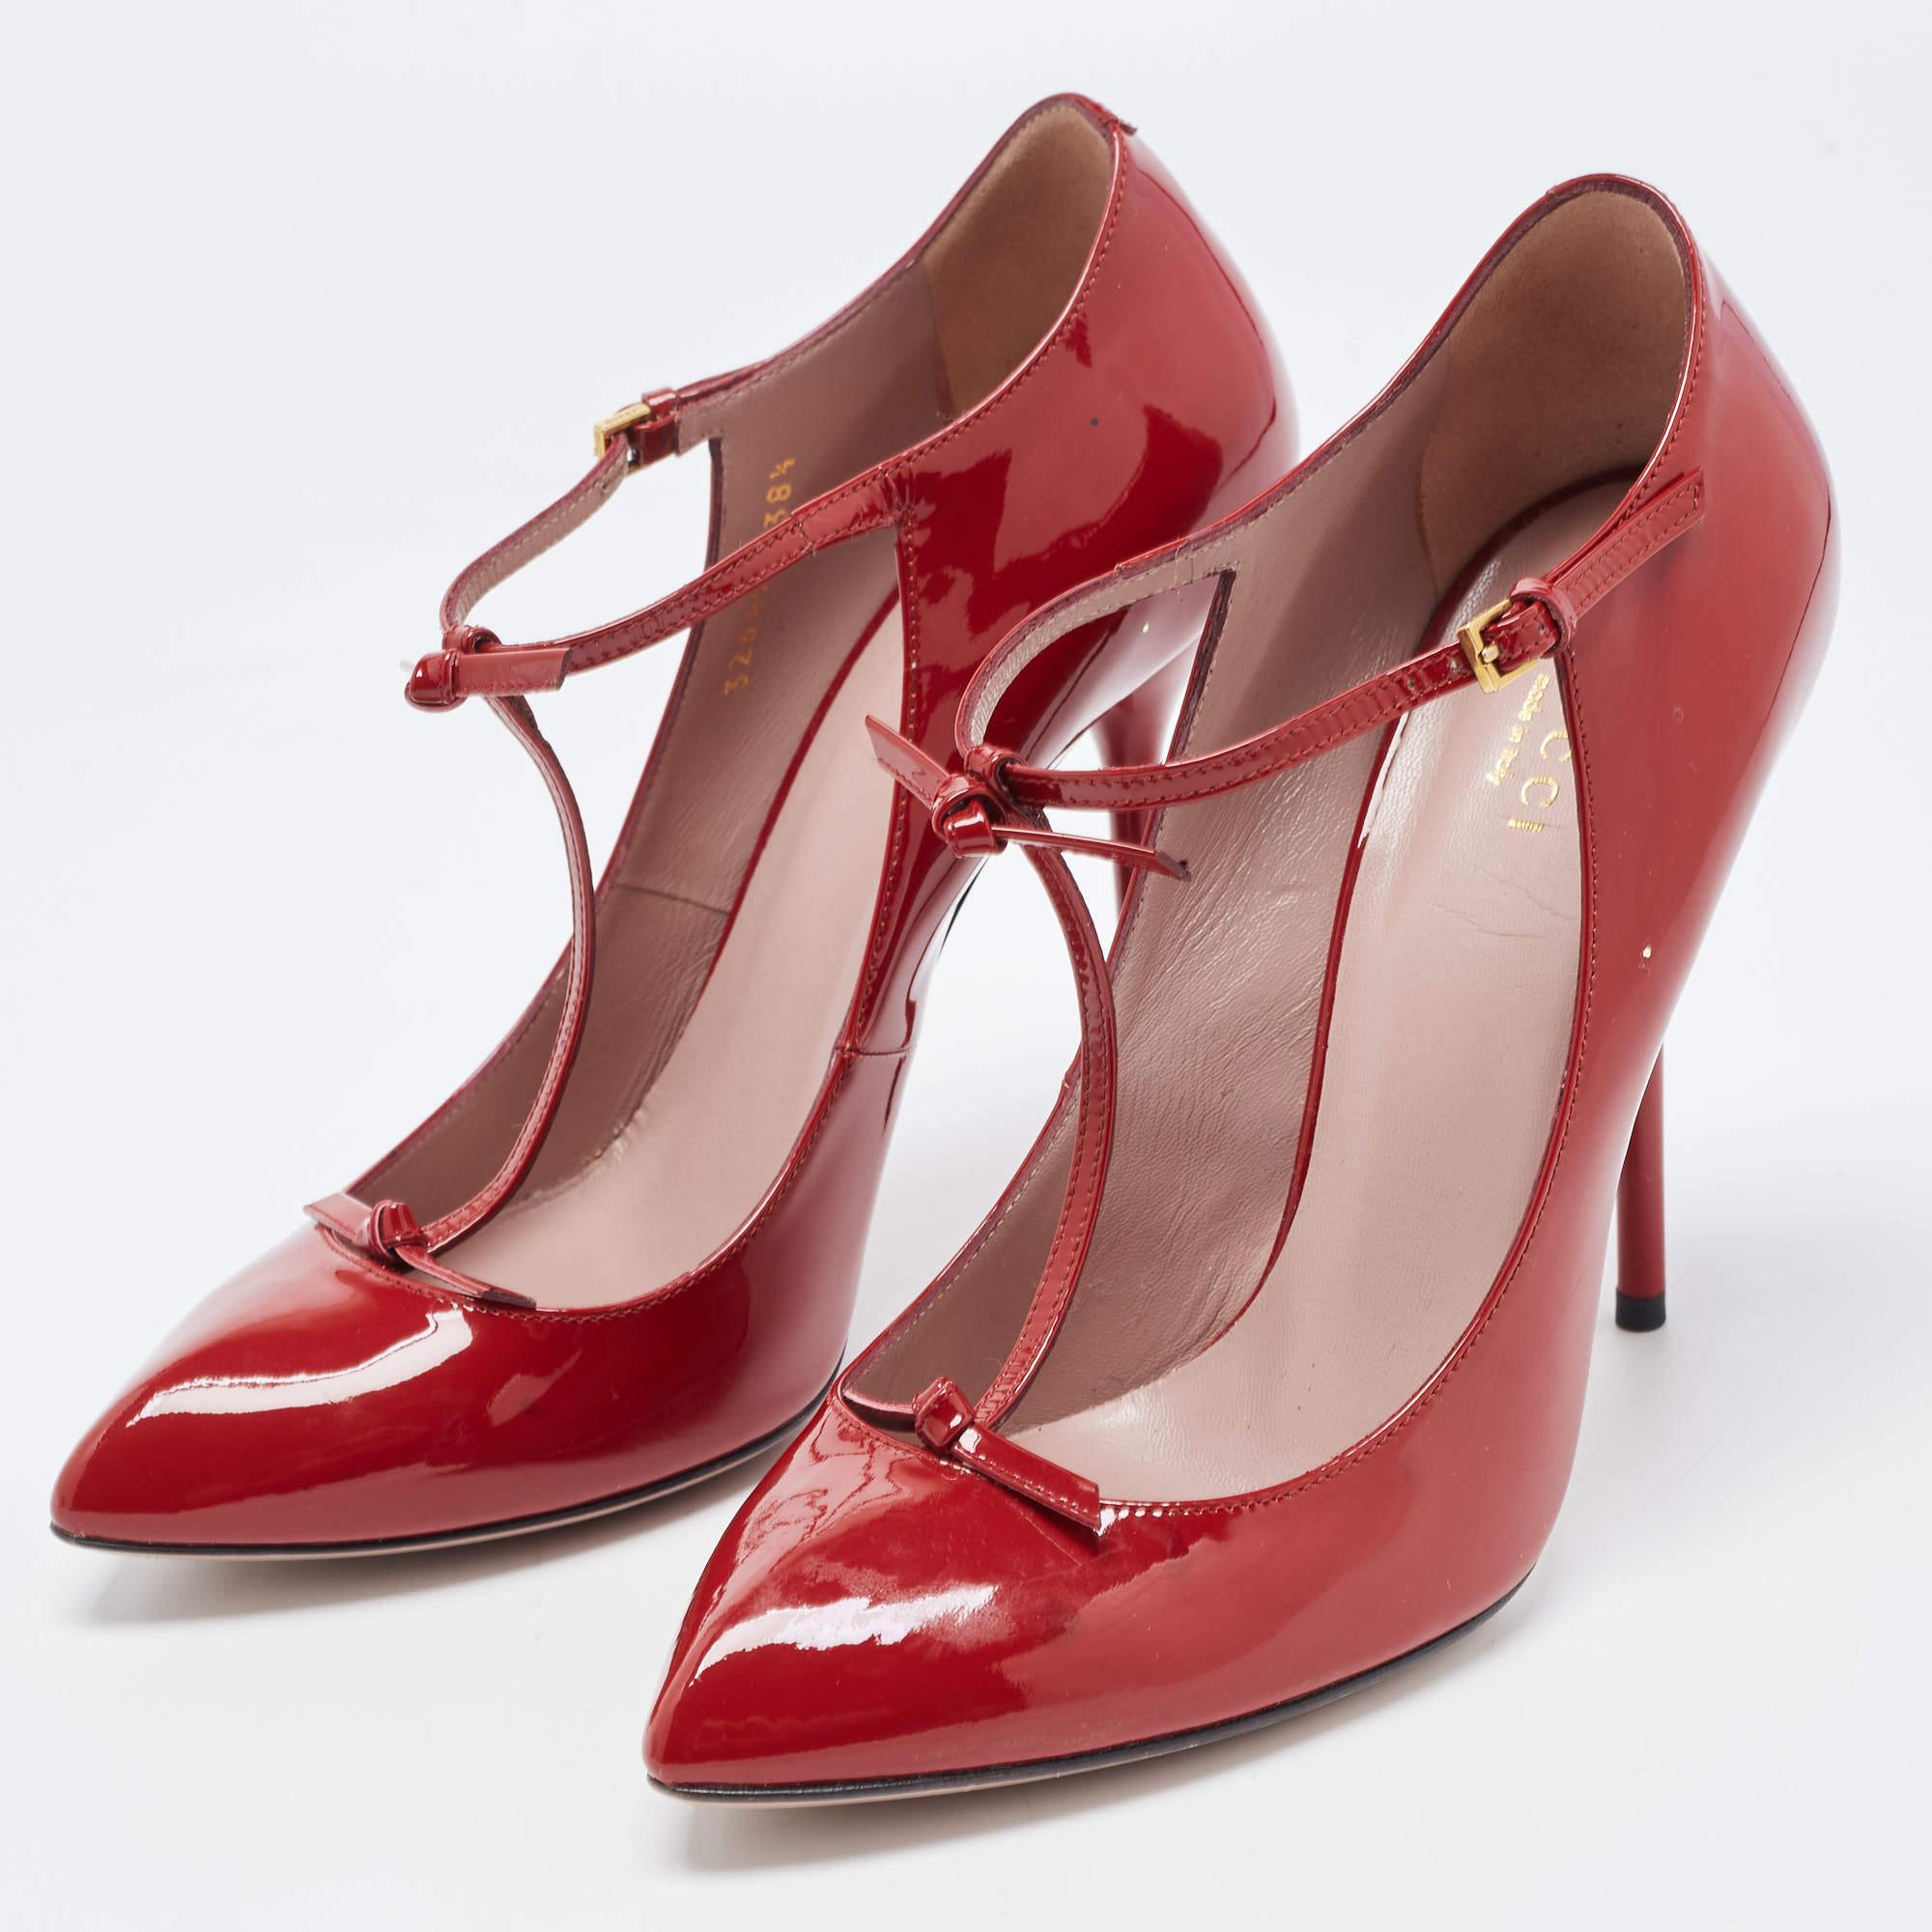 Gucci Red Patent Leather Bow Accents T-Strap Pumps Size 38.5 For Sale 1